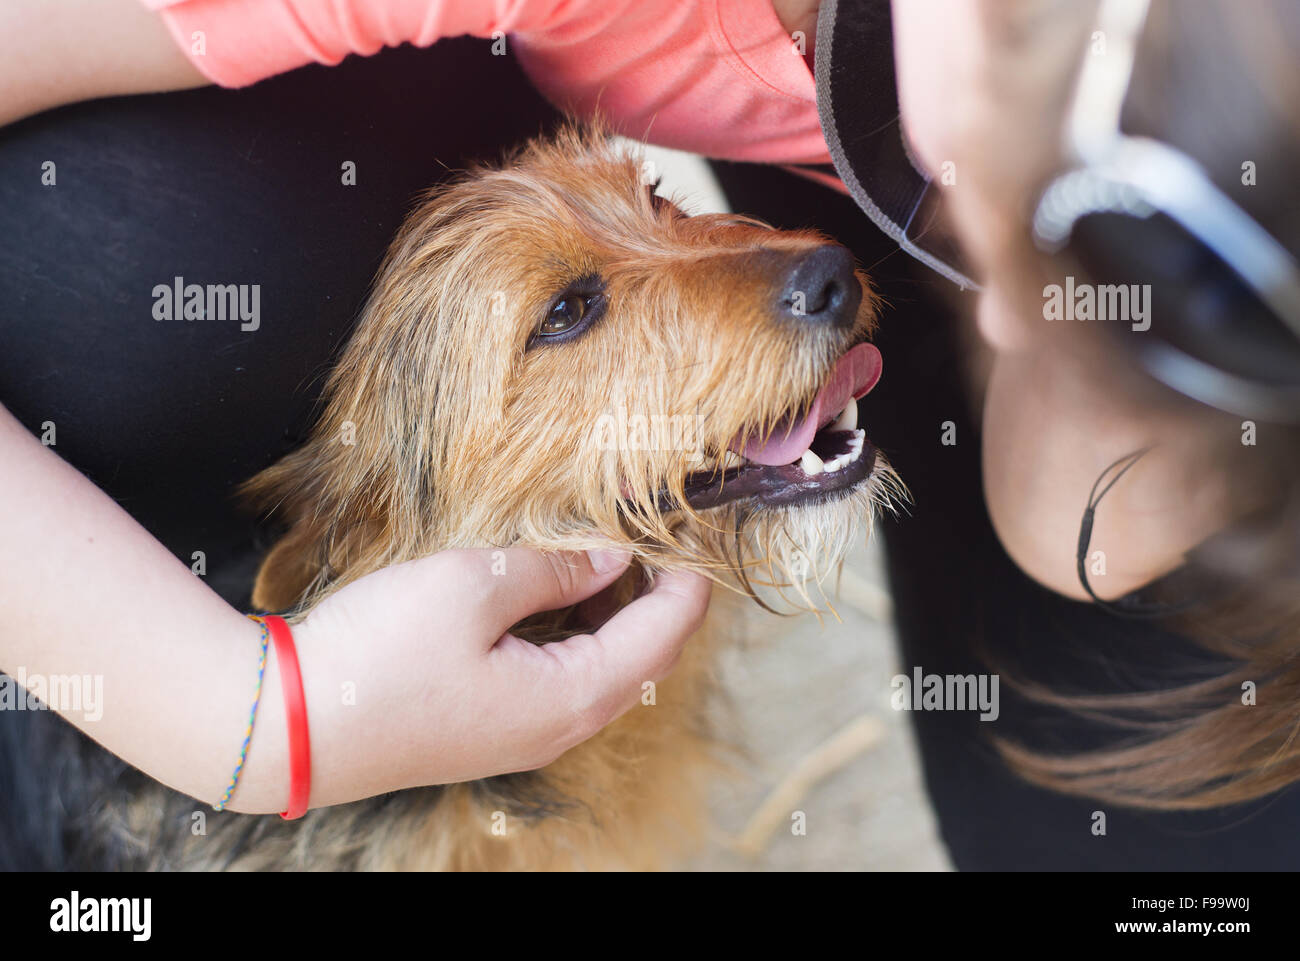 Female hand patting smiling brown dog head Stock Photo